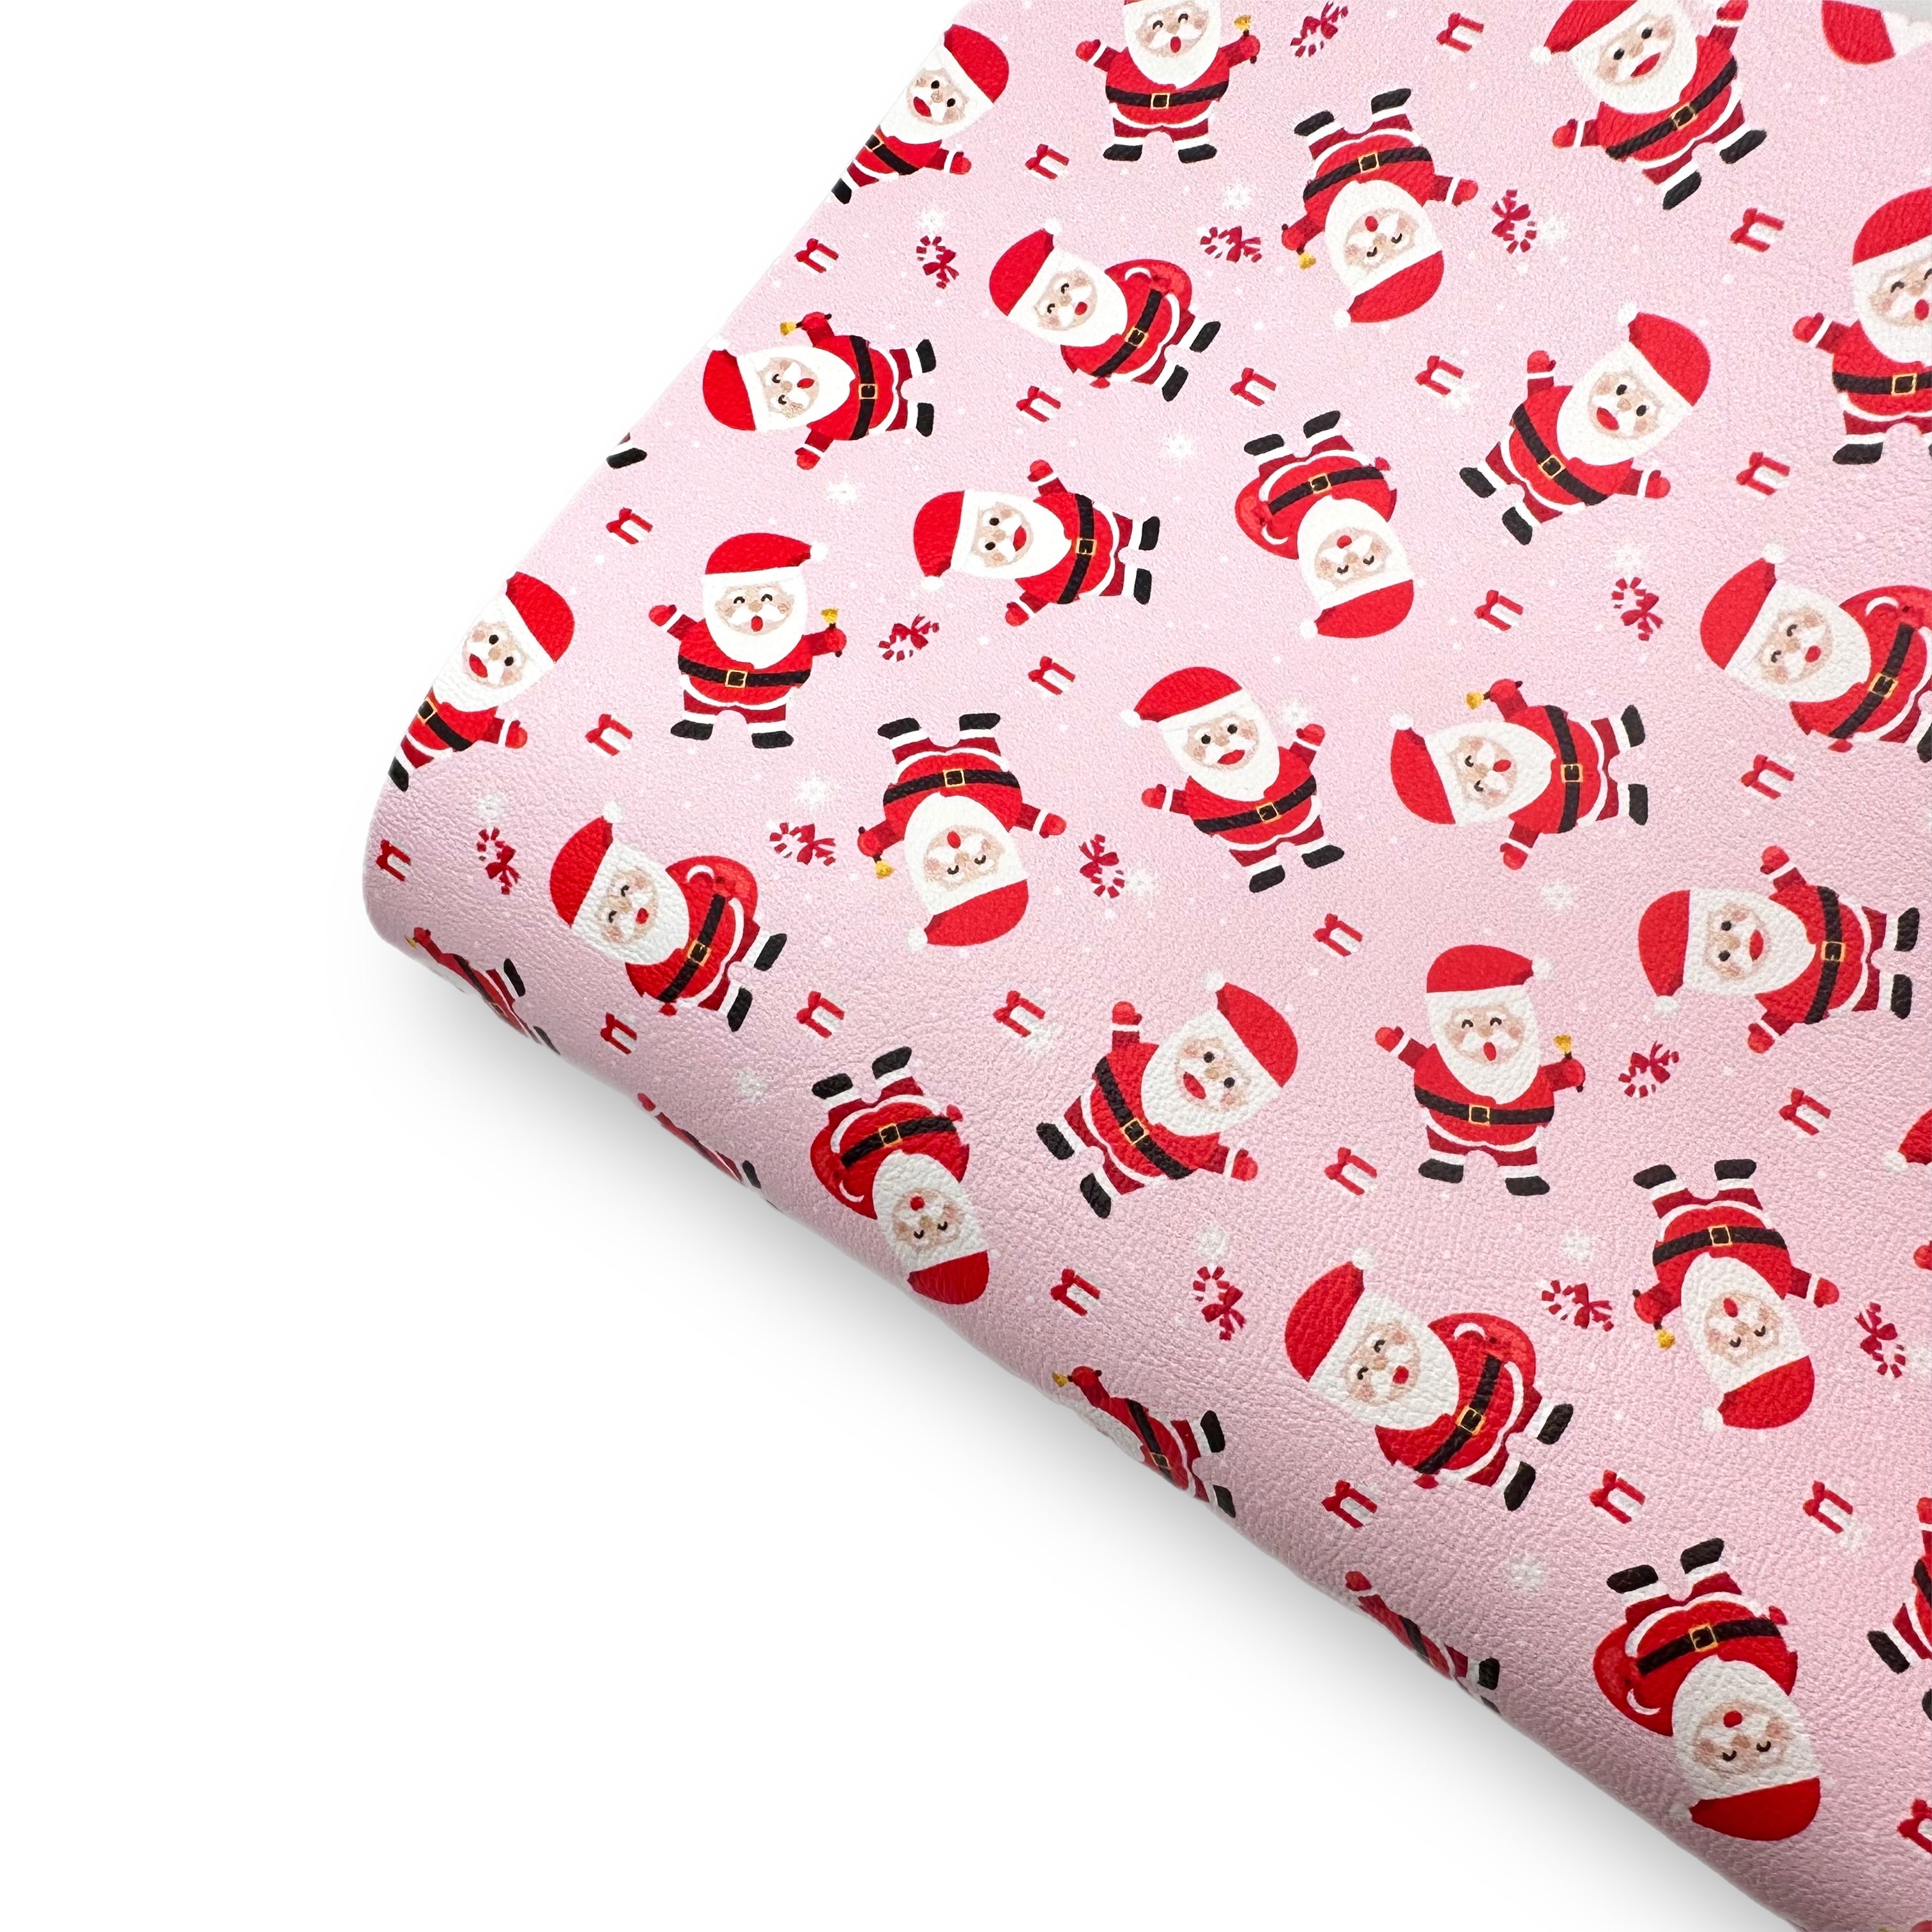 Father Christmas Premium Faux Leather Fabric Sheets